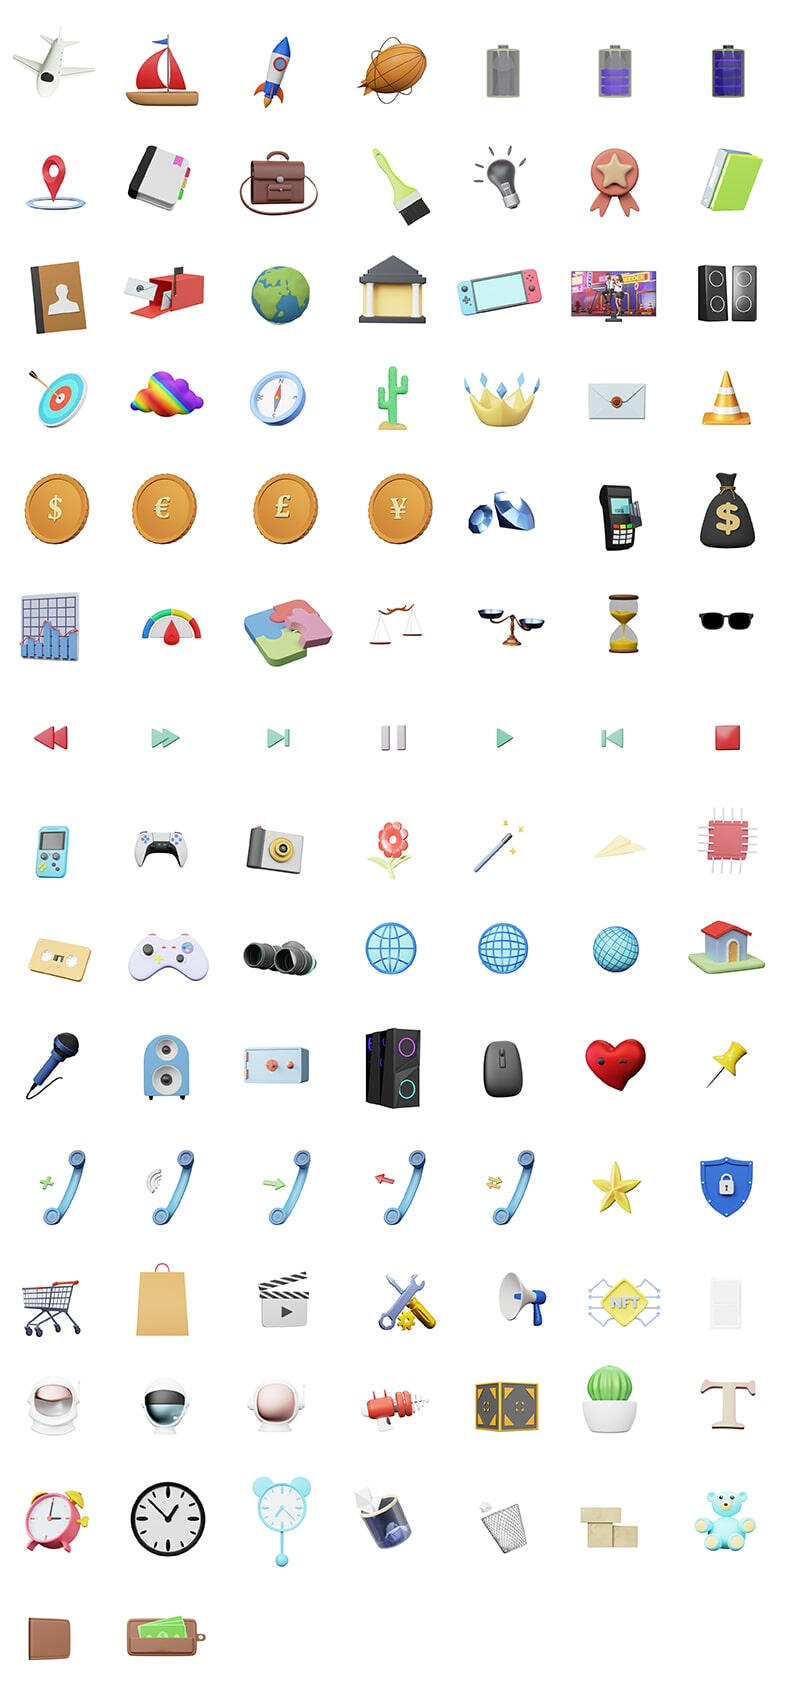 Various 3D icons - including designer, financial, business icons